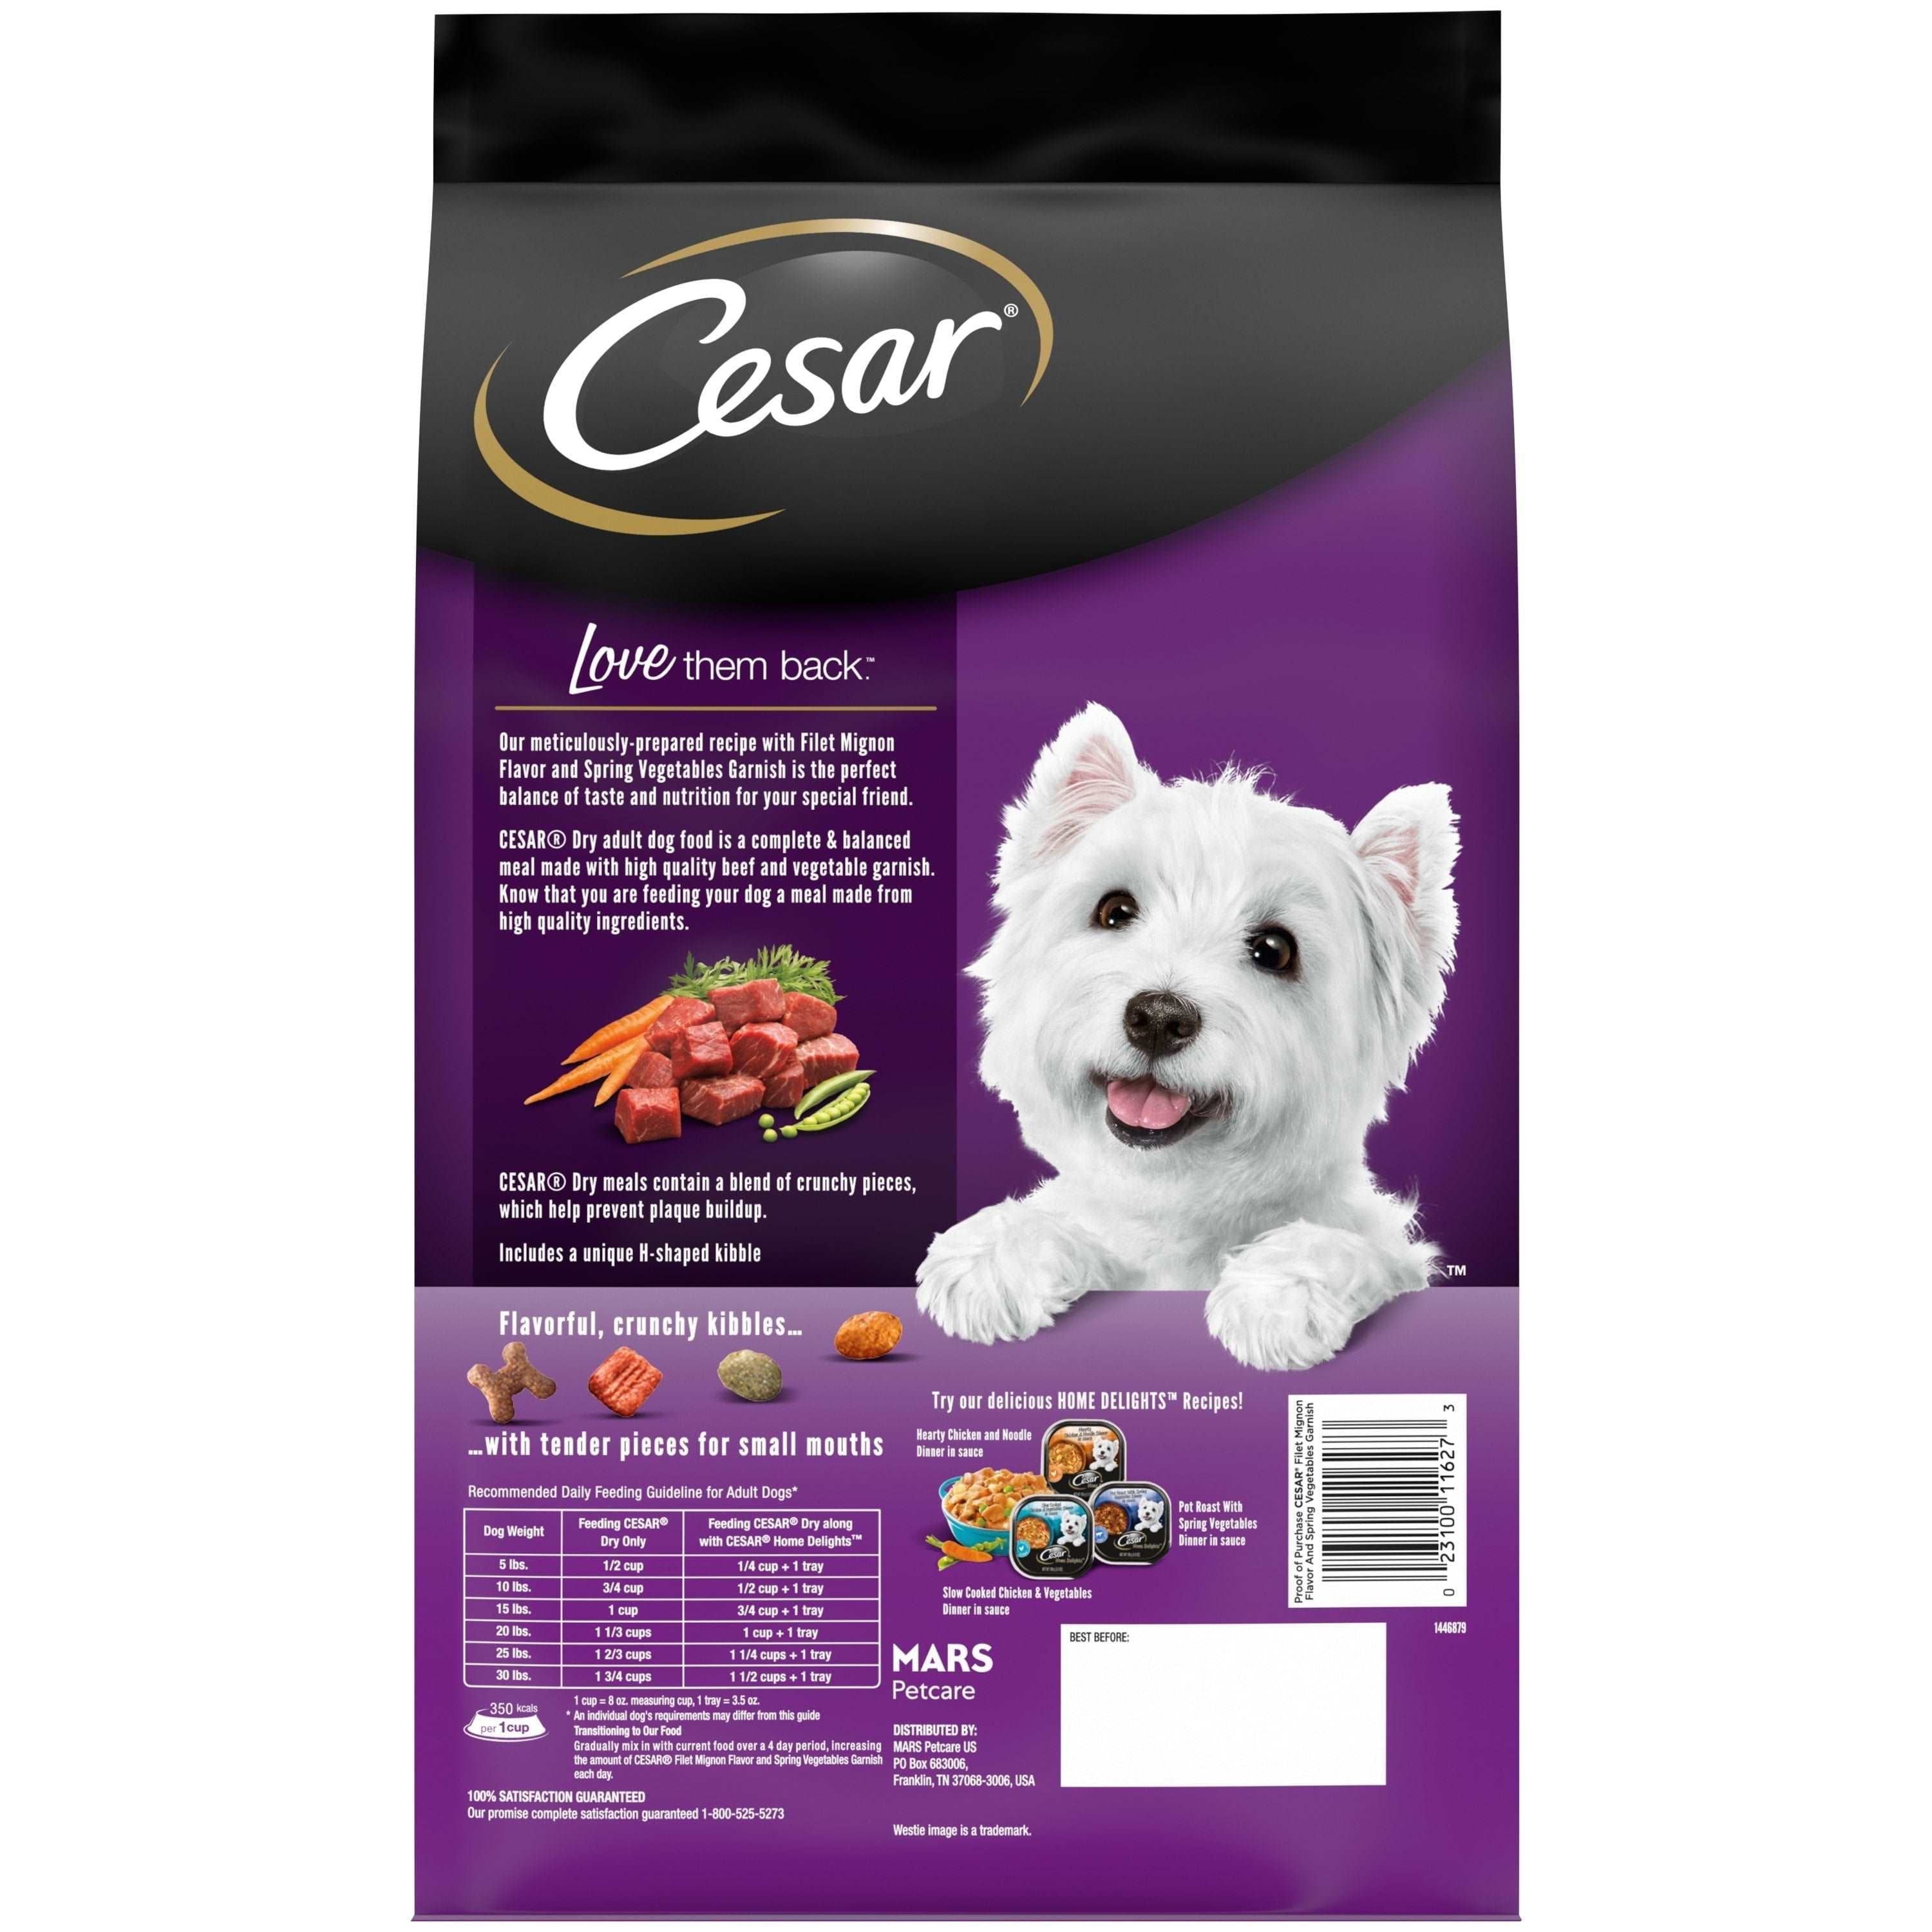 Wholesale prices with free shipping all over United States Cesar Small Breed Filet Mignon Flavor And Spring Vegetables Dry Dog Food Adult, 5 Lb. Bag - Steven Deals